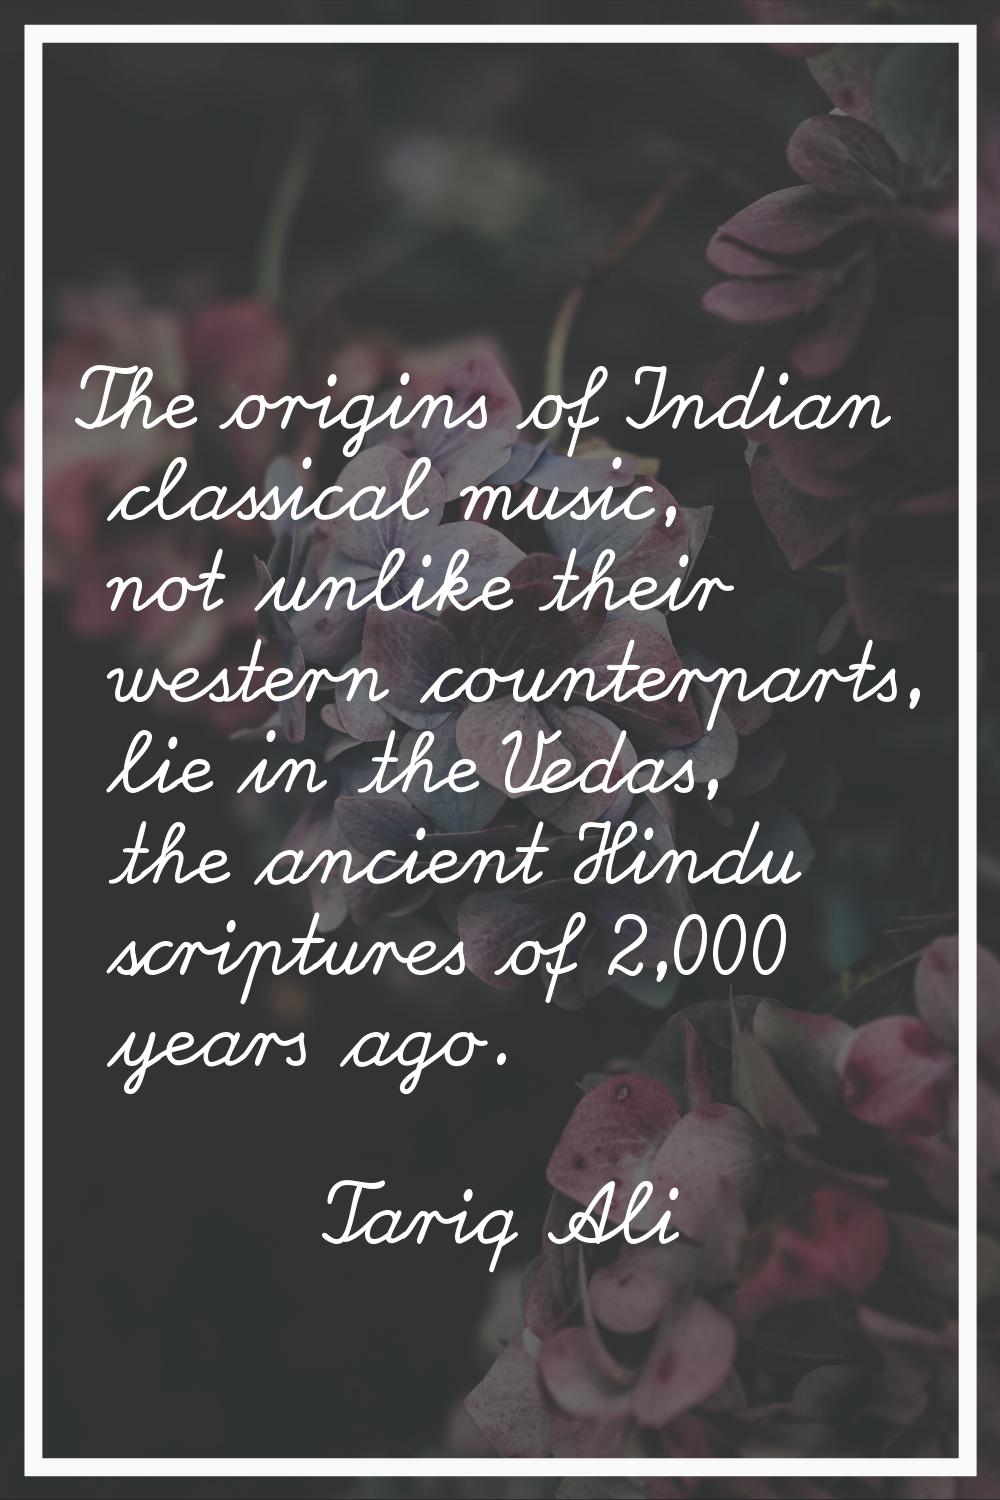 The origins of Indian classical music, not unlike their western counterparts, lie in the Vedas, the